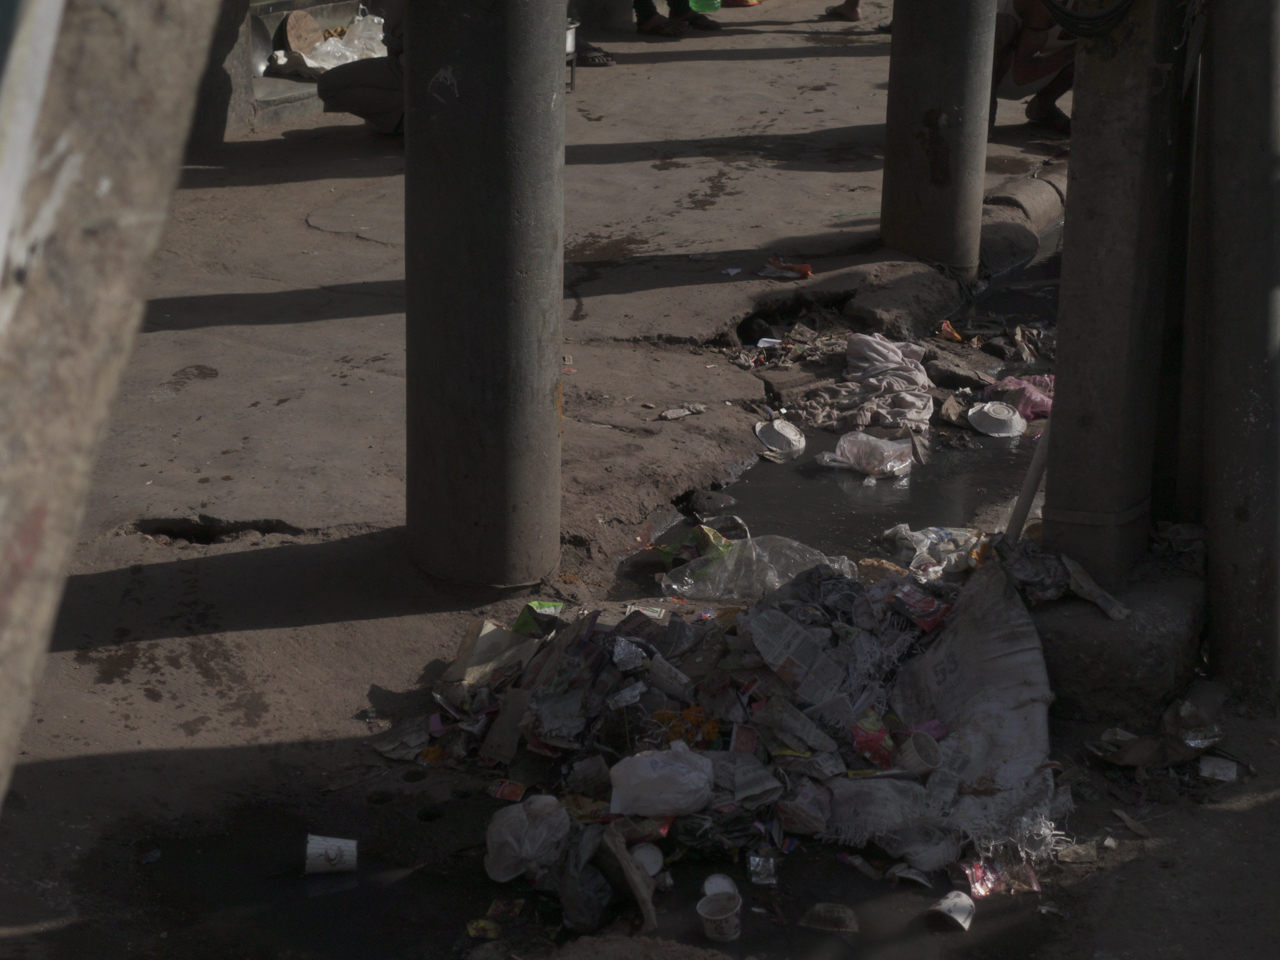 This was the most shocking part when I arrived in India. There is trash everywhere and obviously no system nor institution that cares about collecting and recycling trash.